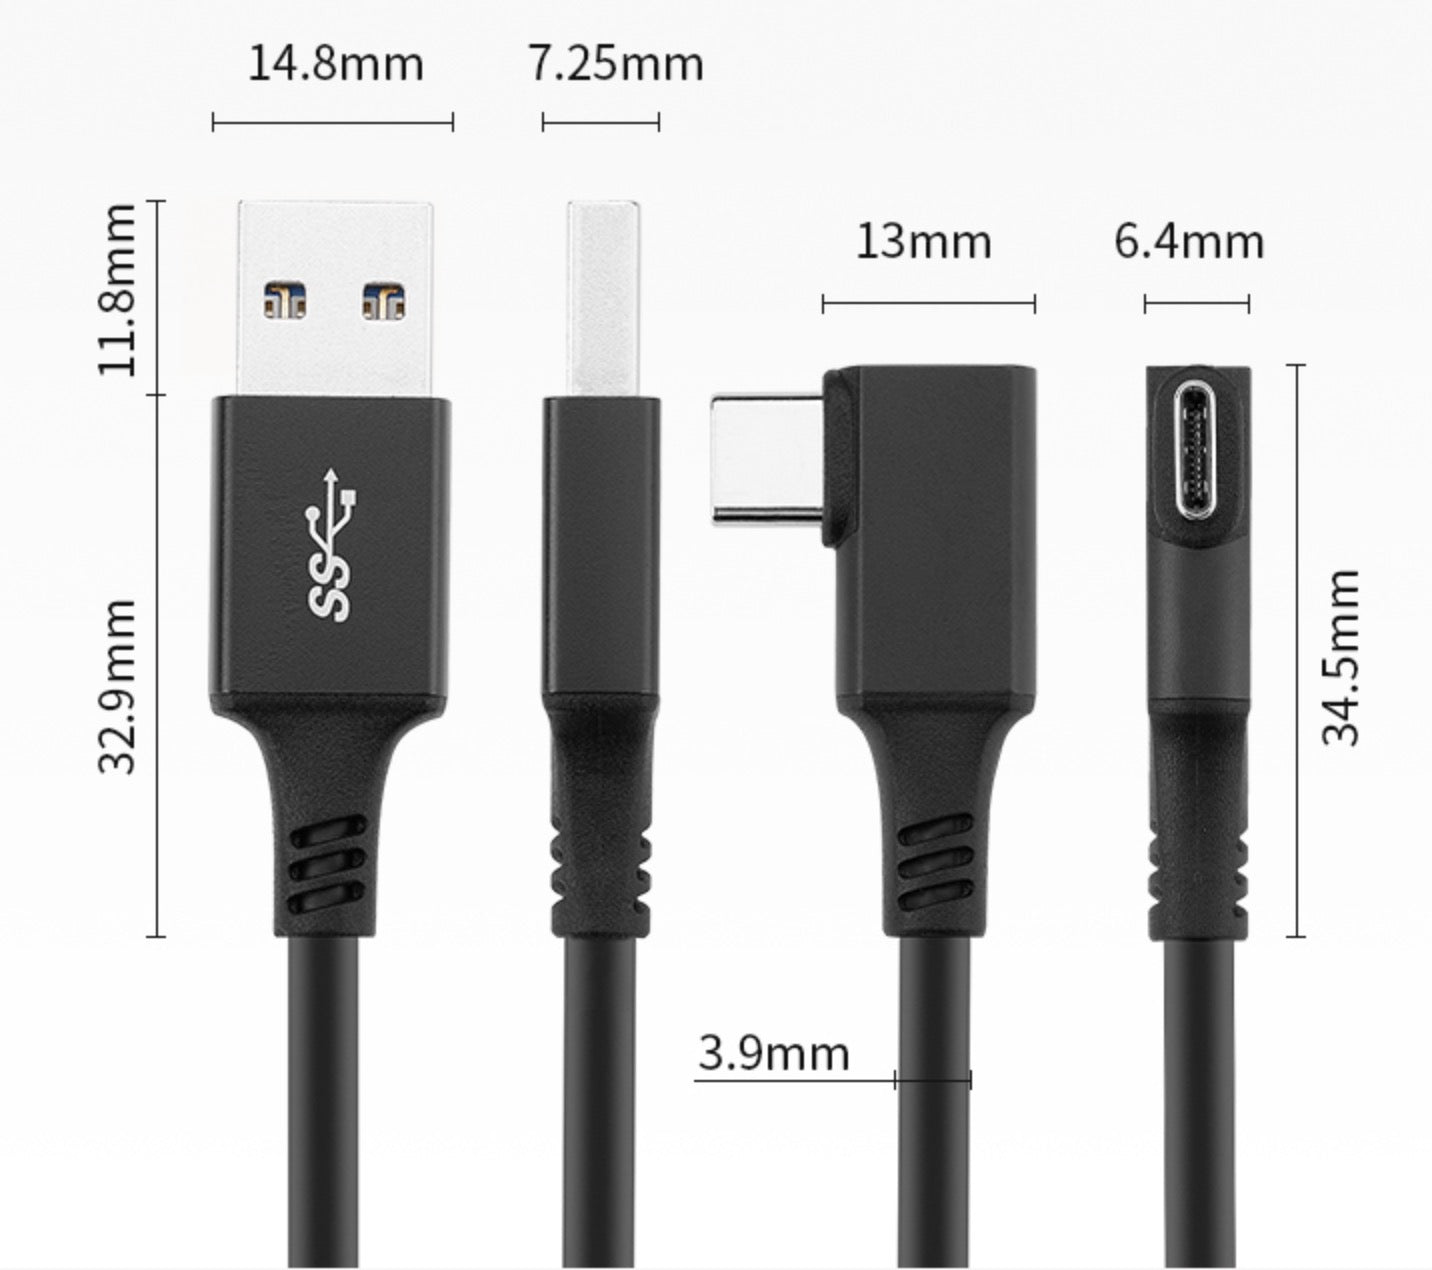 USB-A 3.0 to USB-C High Speed Data Charging Cable for Oculus Quest (6m)